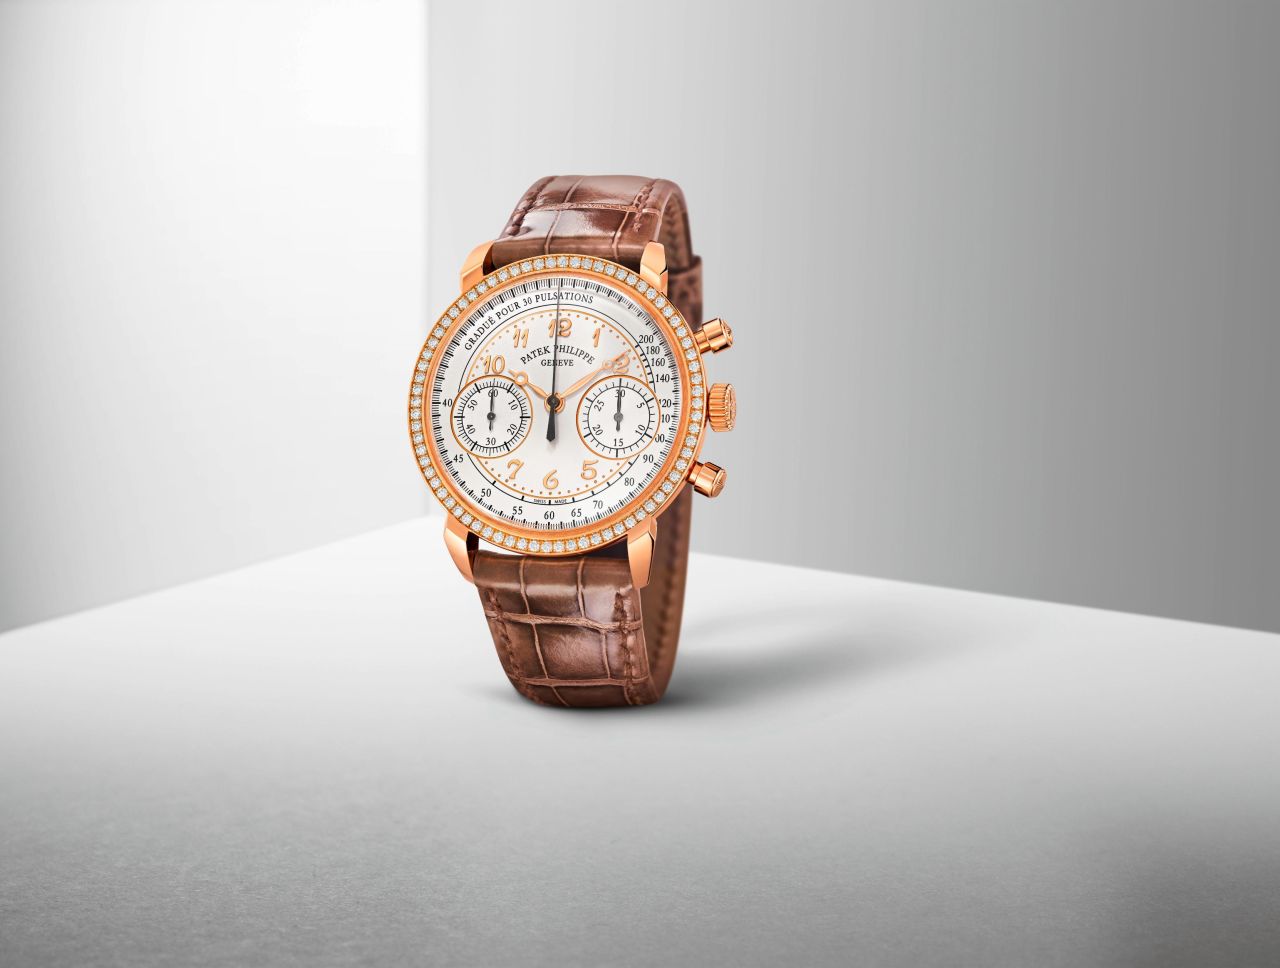 Reference 7150/250R-001 is the only chronograph in Patek Philippe's collection specifically aimed at women.